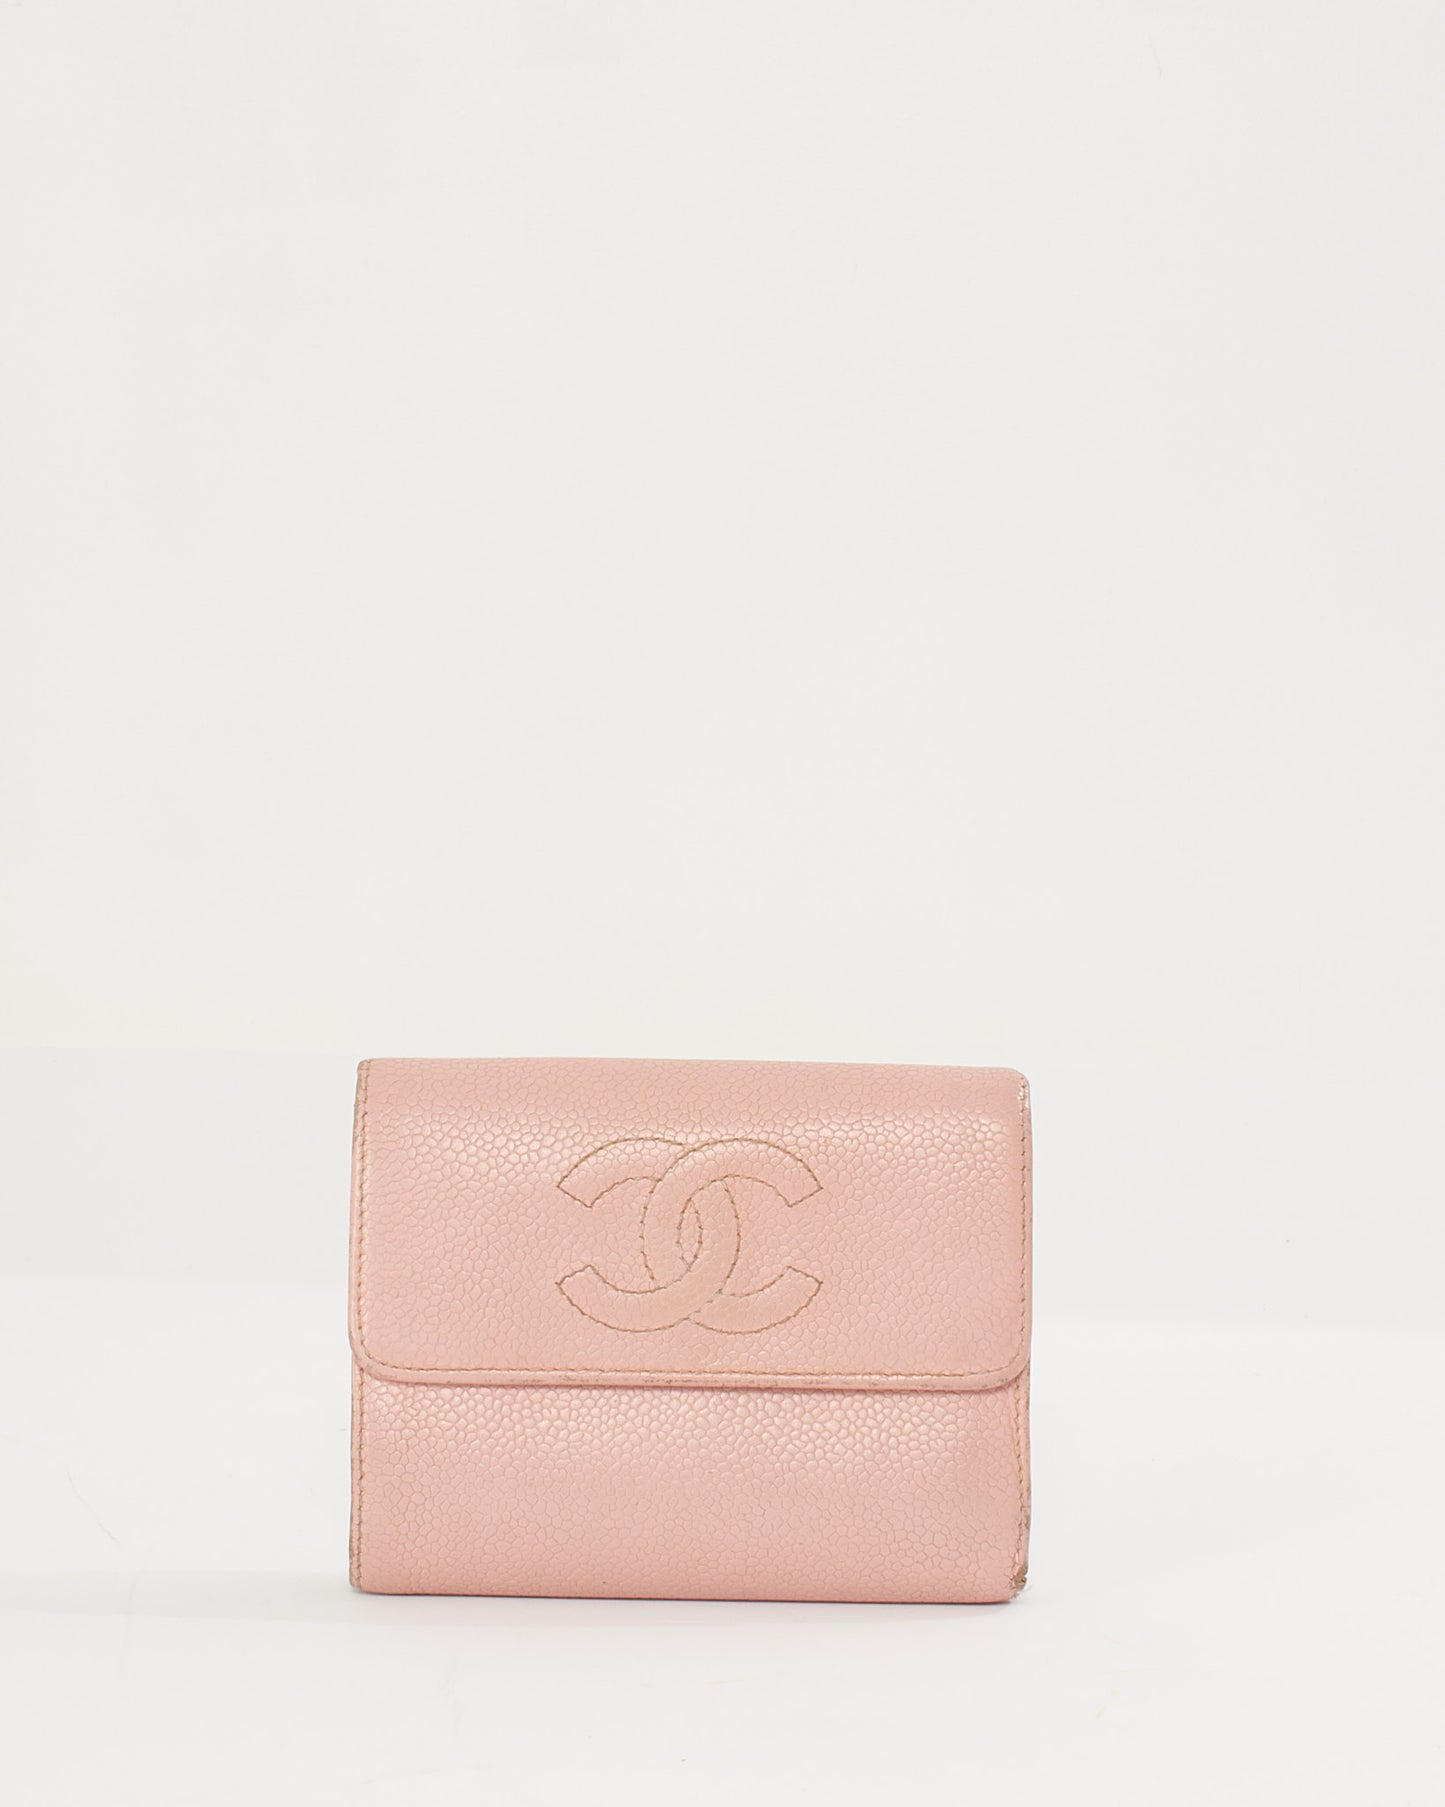 Chanel Pink Caviar Timeless CC Compact Wallet